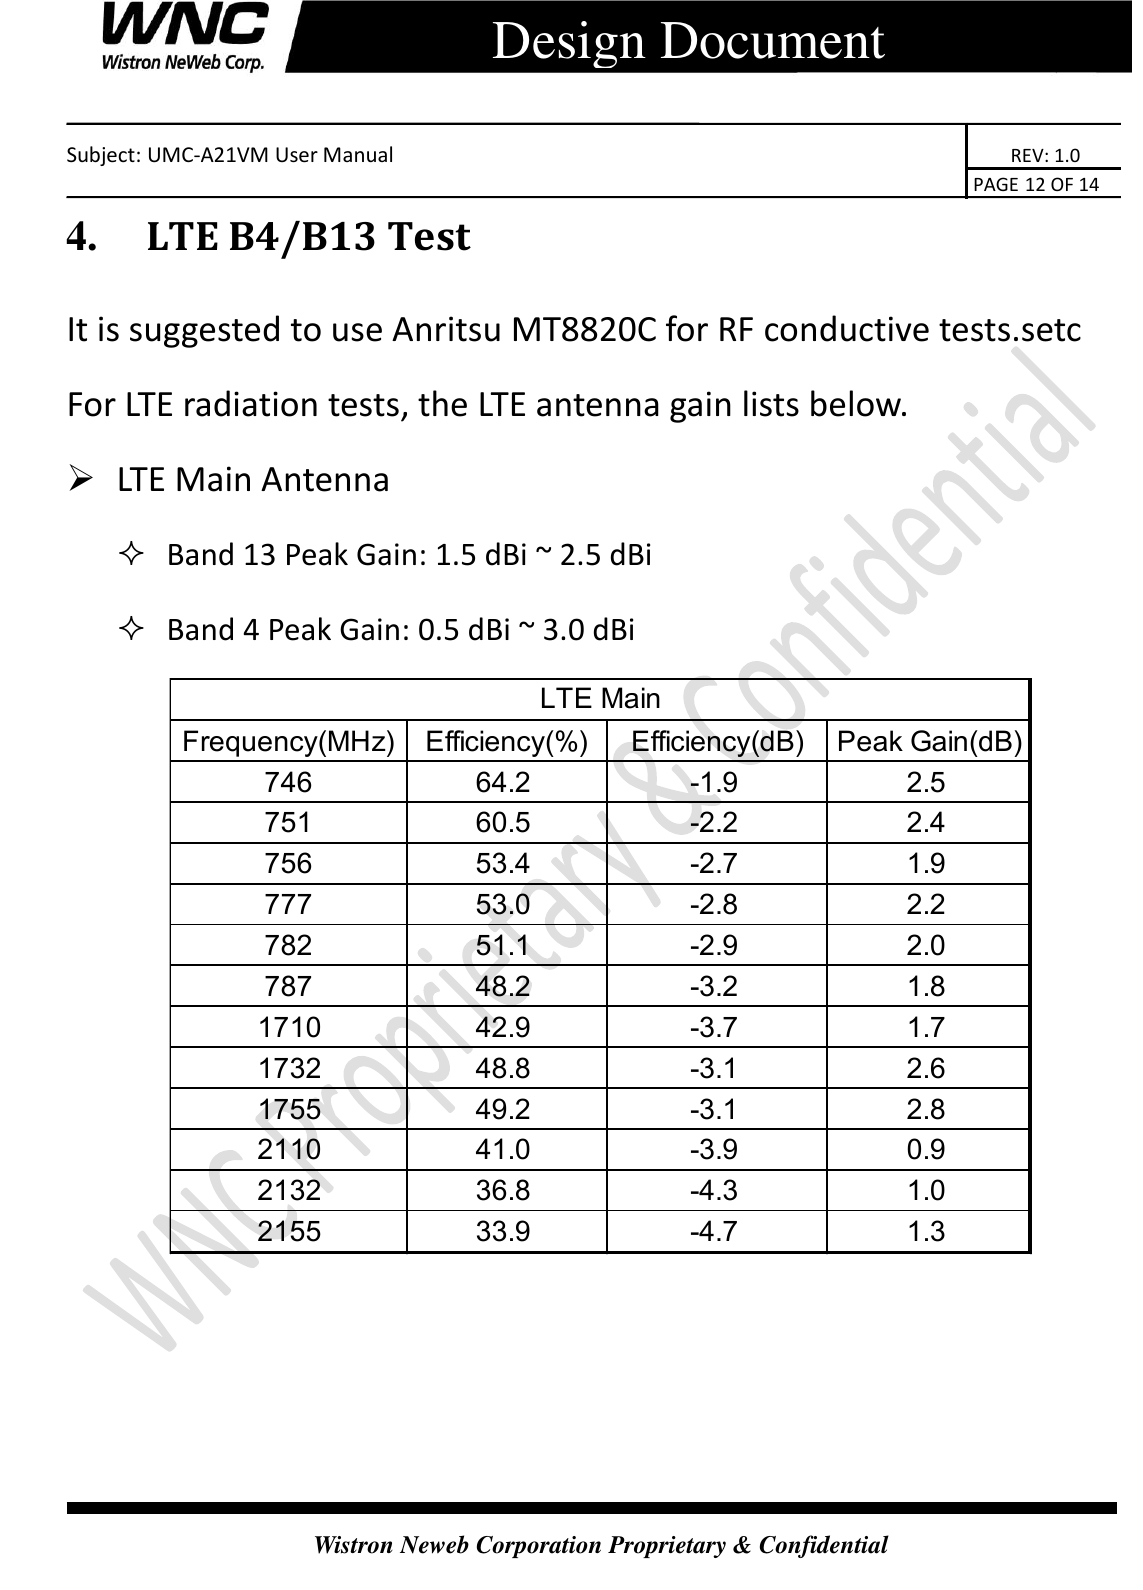    Subject: UMC-A21VM User Manual                                                                      REV: 1.0                                                                                        PAGE 12 OF 14  Wistron Neweb Corporation Proprietary &amp; Confidential      Design Document 4.   LTE B4/B13 Test It is suggested to use Anritsu MT8820C for RF conductive tests.setc For LTE radiation tests, the LTE antenna gain lists below.  LTE Main Antenna    Band 13 Peak Gain: 1.5 dBi ~ 2.5 dBi    Band 4 Peak Gain: 0.5 dBi ~ 3.0 dBi       Frequency(MHz) Efficiency(%) Efficiency(dB) Peak Gain(dB)746 64.2 -1.9 2.5751 60.5 -2.2 2.4756 53.4 -2.7 1.9777 53.0 -2.8 2.2782 51.1 -2.9 2.0787 48.2 -3.2 1.81710 42.9 -3.7 1.71732 48.8 -3.1 2.61755 49.2 -3.1 2.82110 41.0 -3.9 0.92132 36.8 -4.3 1.02155 33.9 -4.7 1.3LTE Main